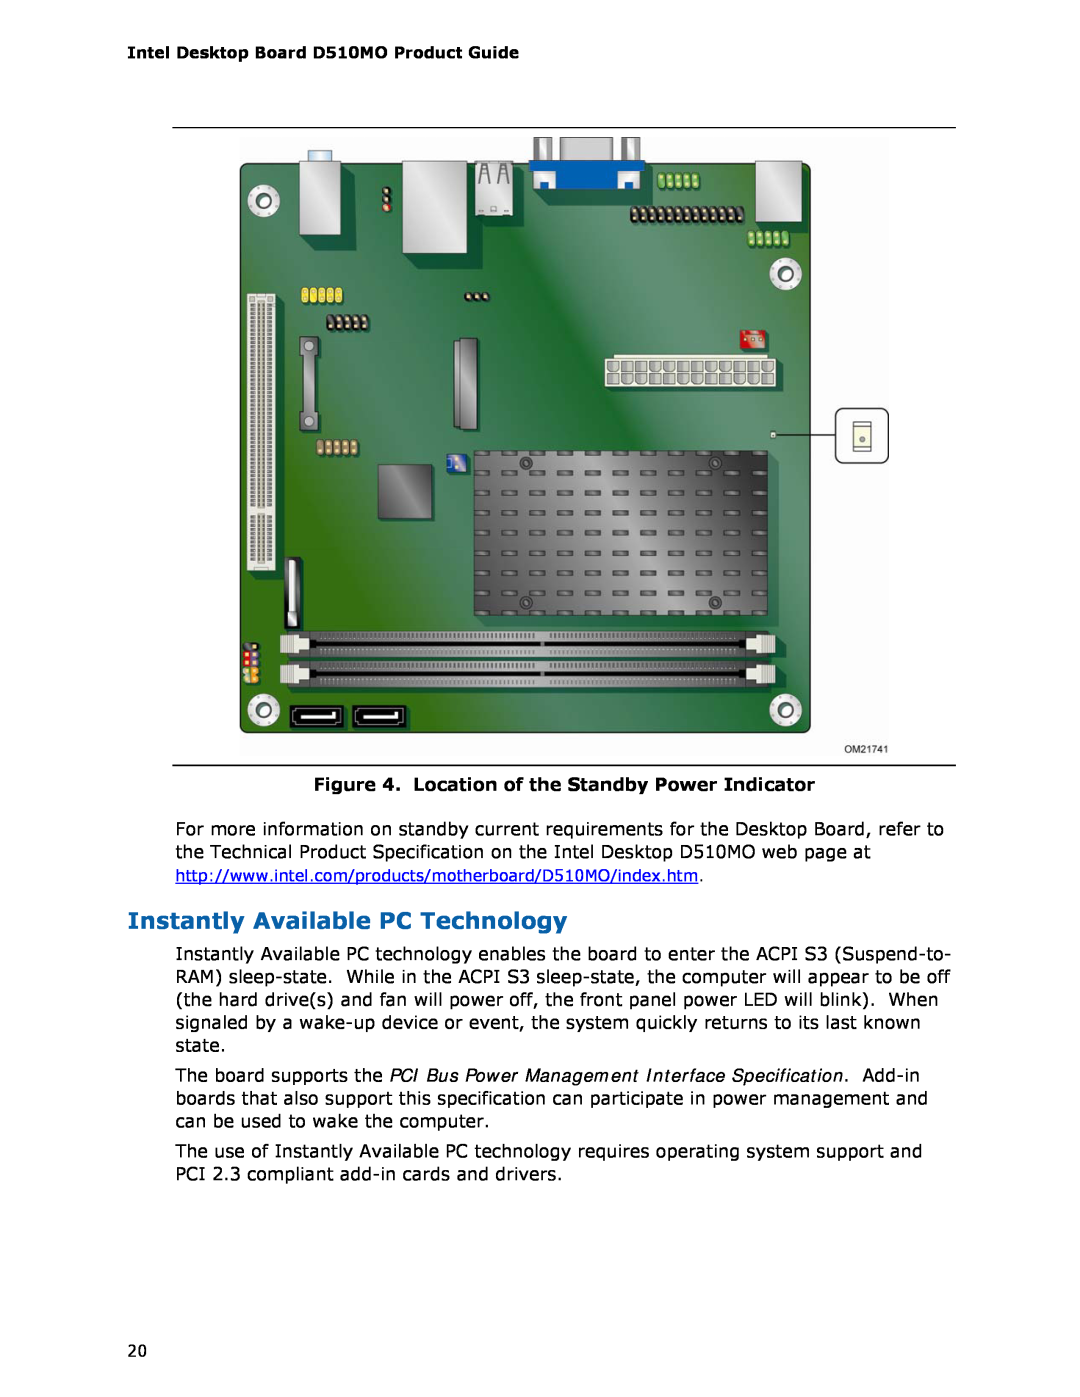 Intel D510MO manual Instantly Available PC Technology, Location of the Standby Power Indicator 